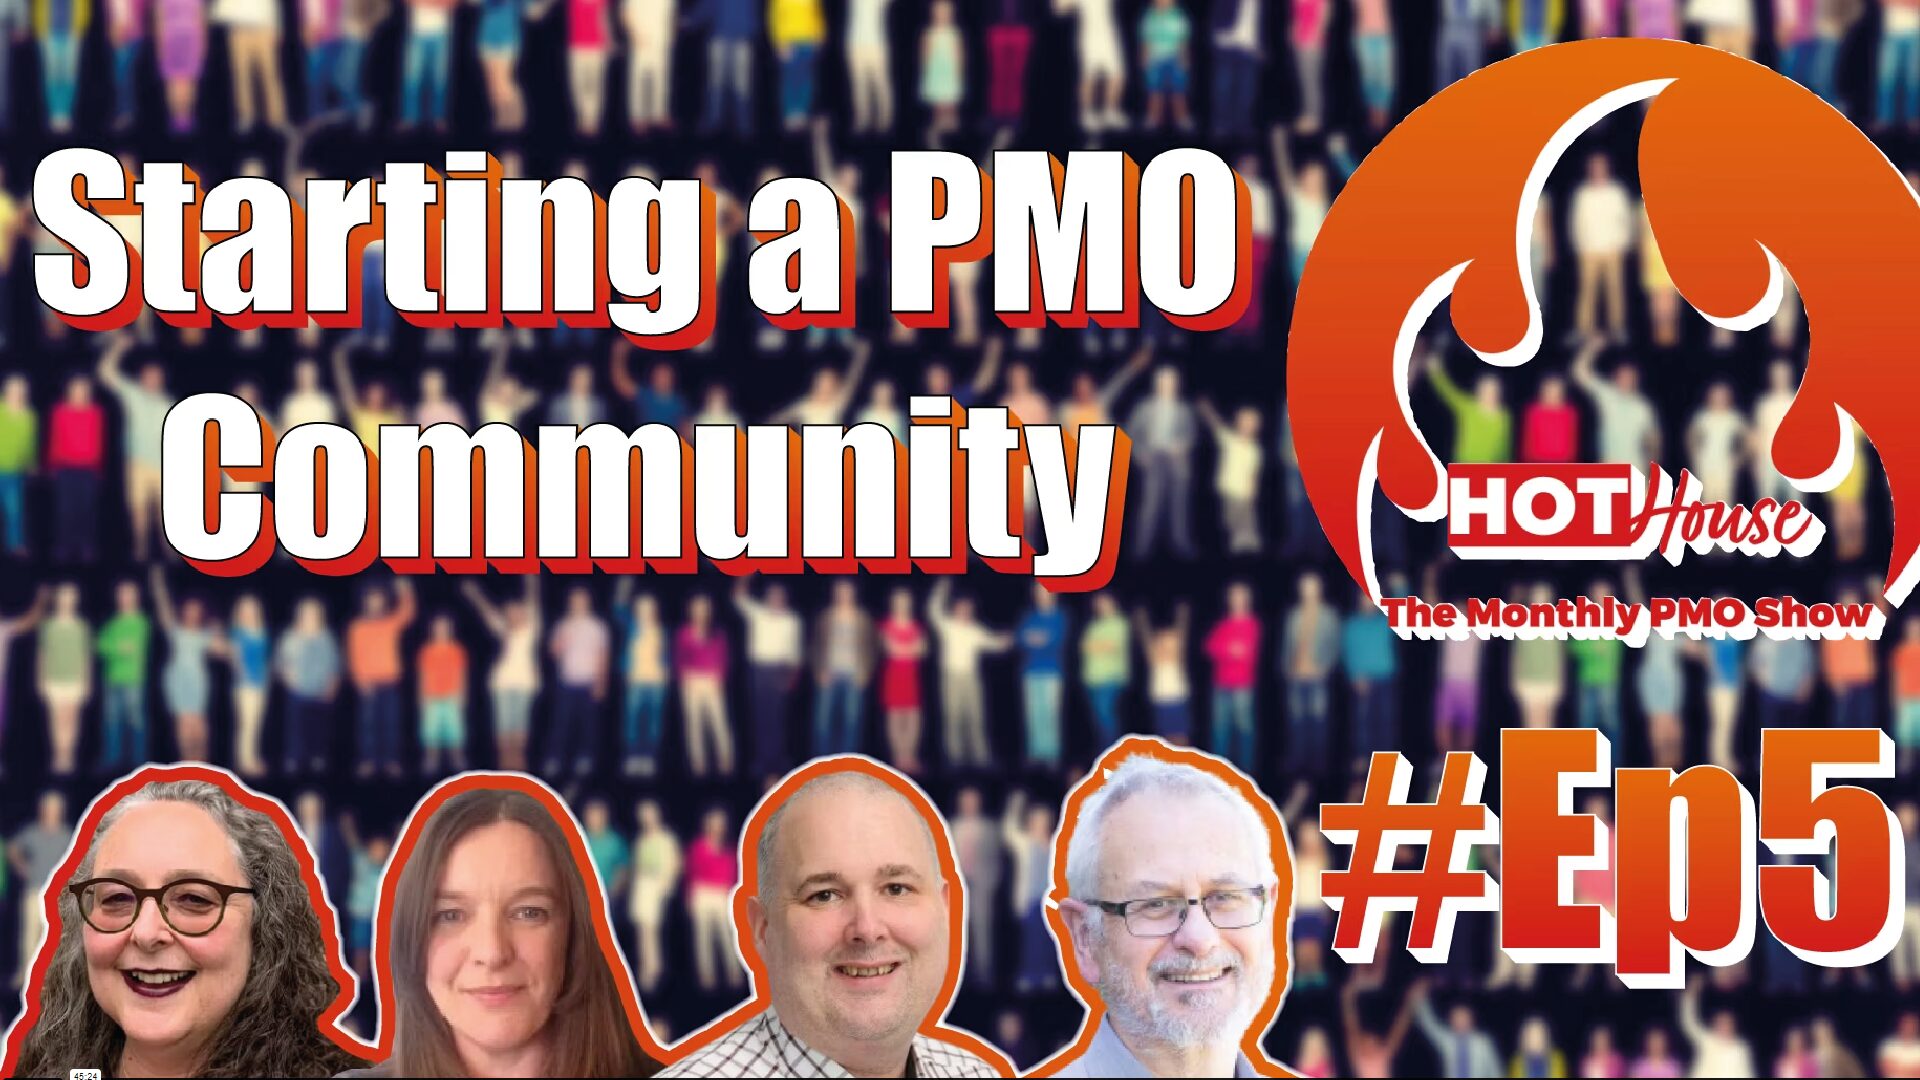 Image showing the video speakers and headline saying "starting a PMO Community"